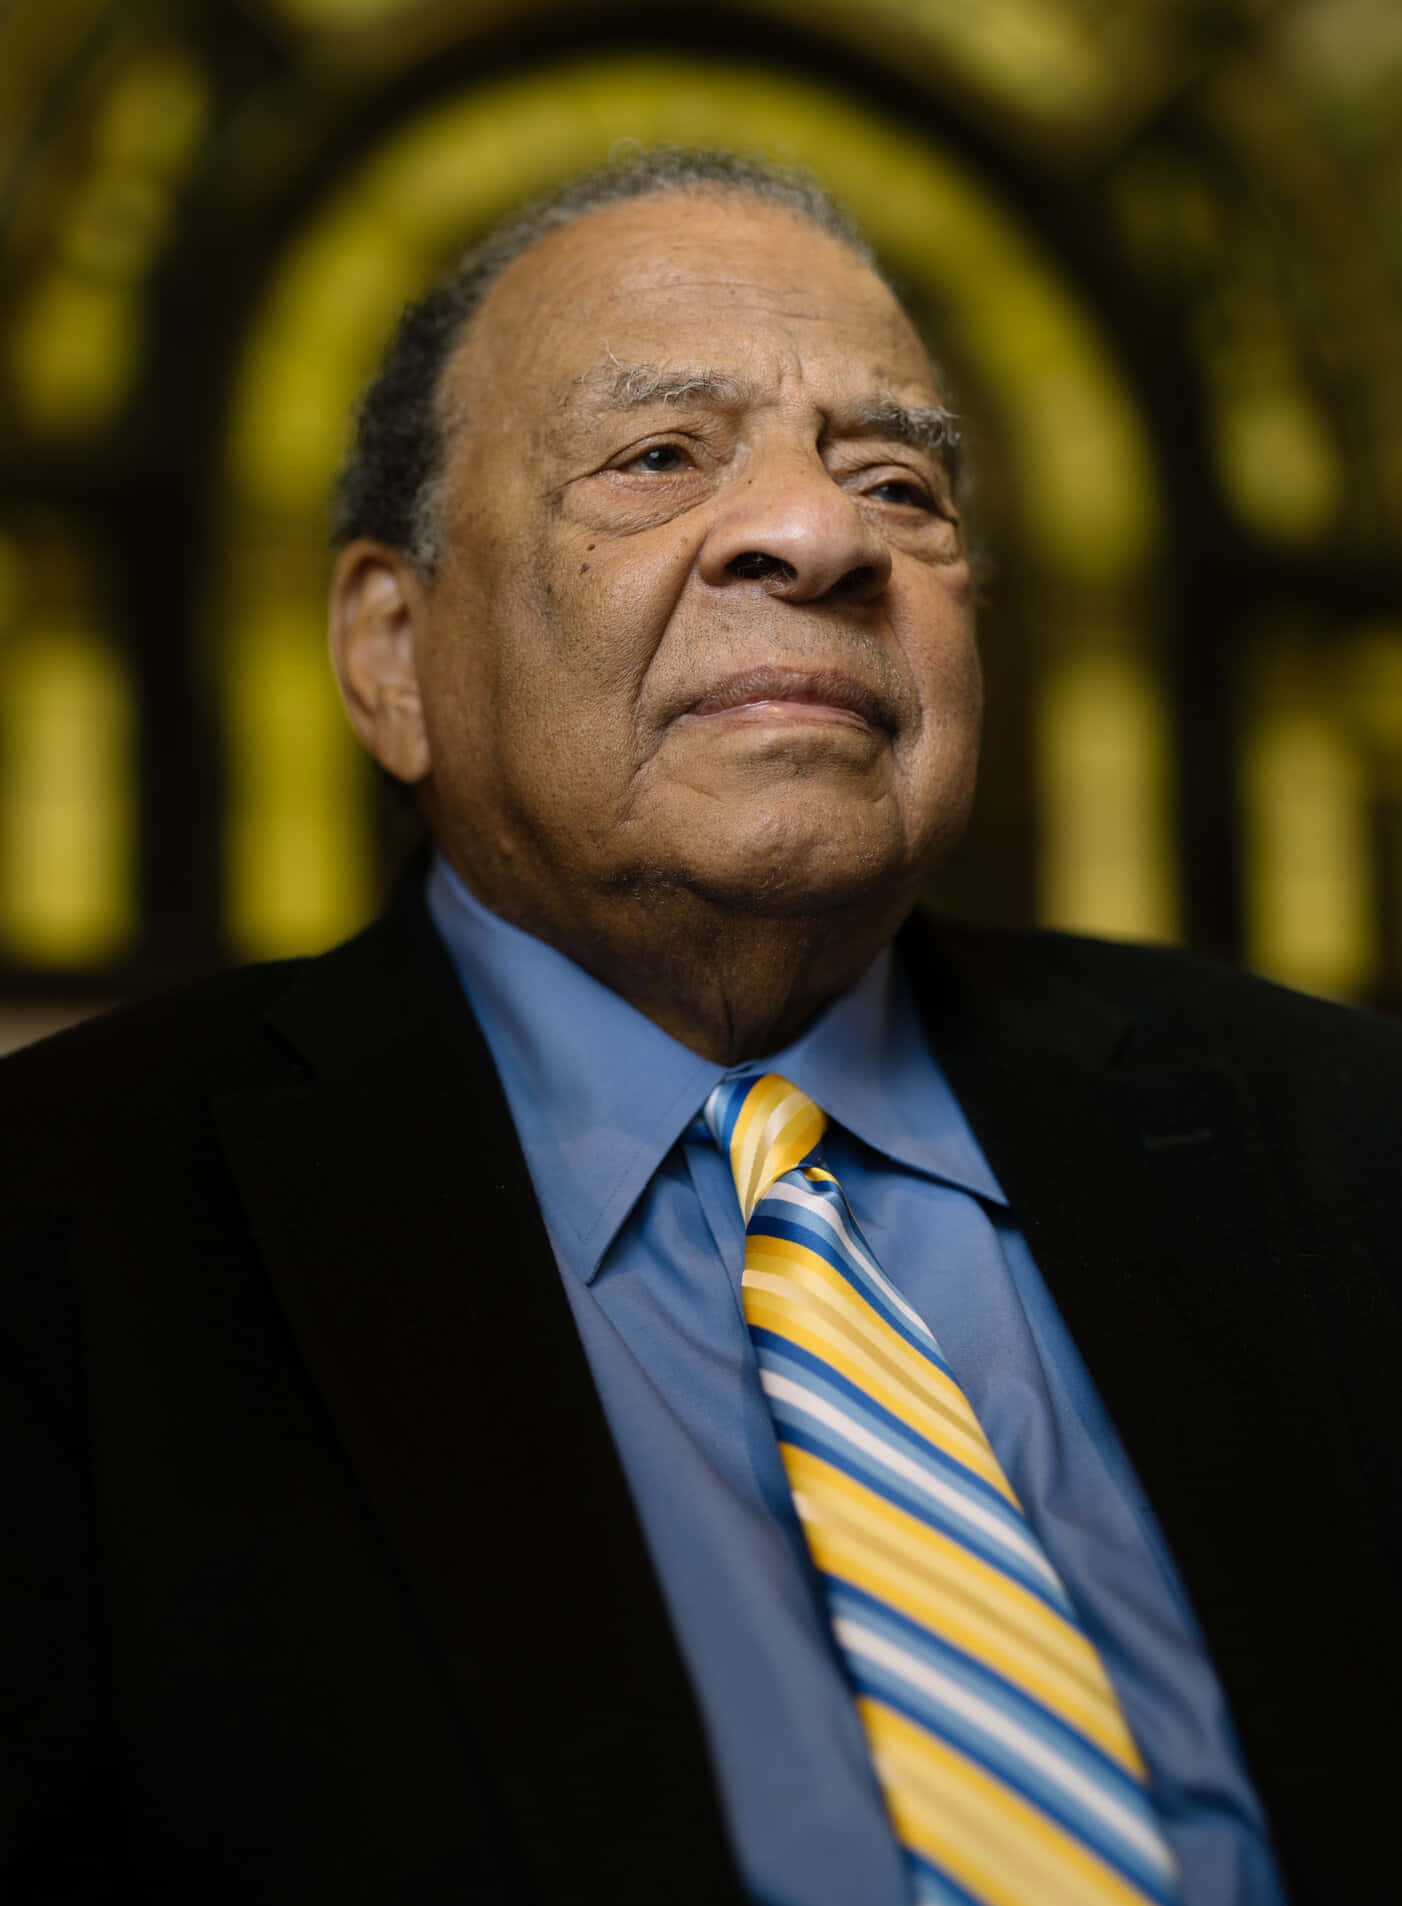 Prominent Civil Rights Activist Andrew Young Reflecting in Church Wallpaper